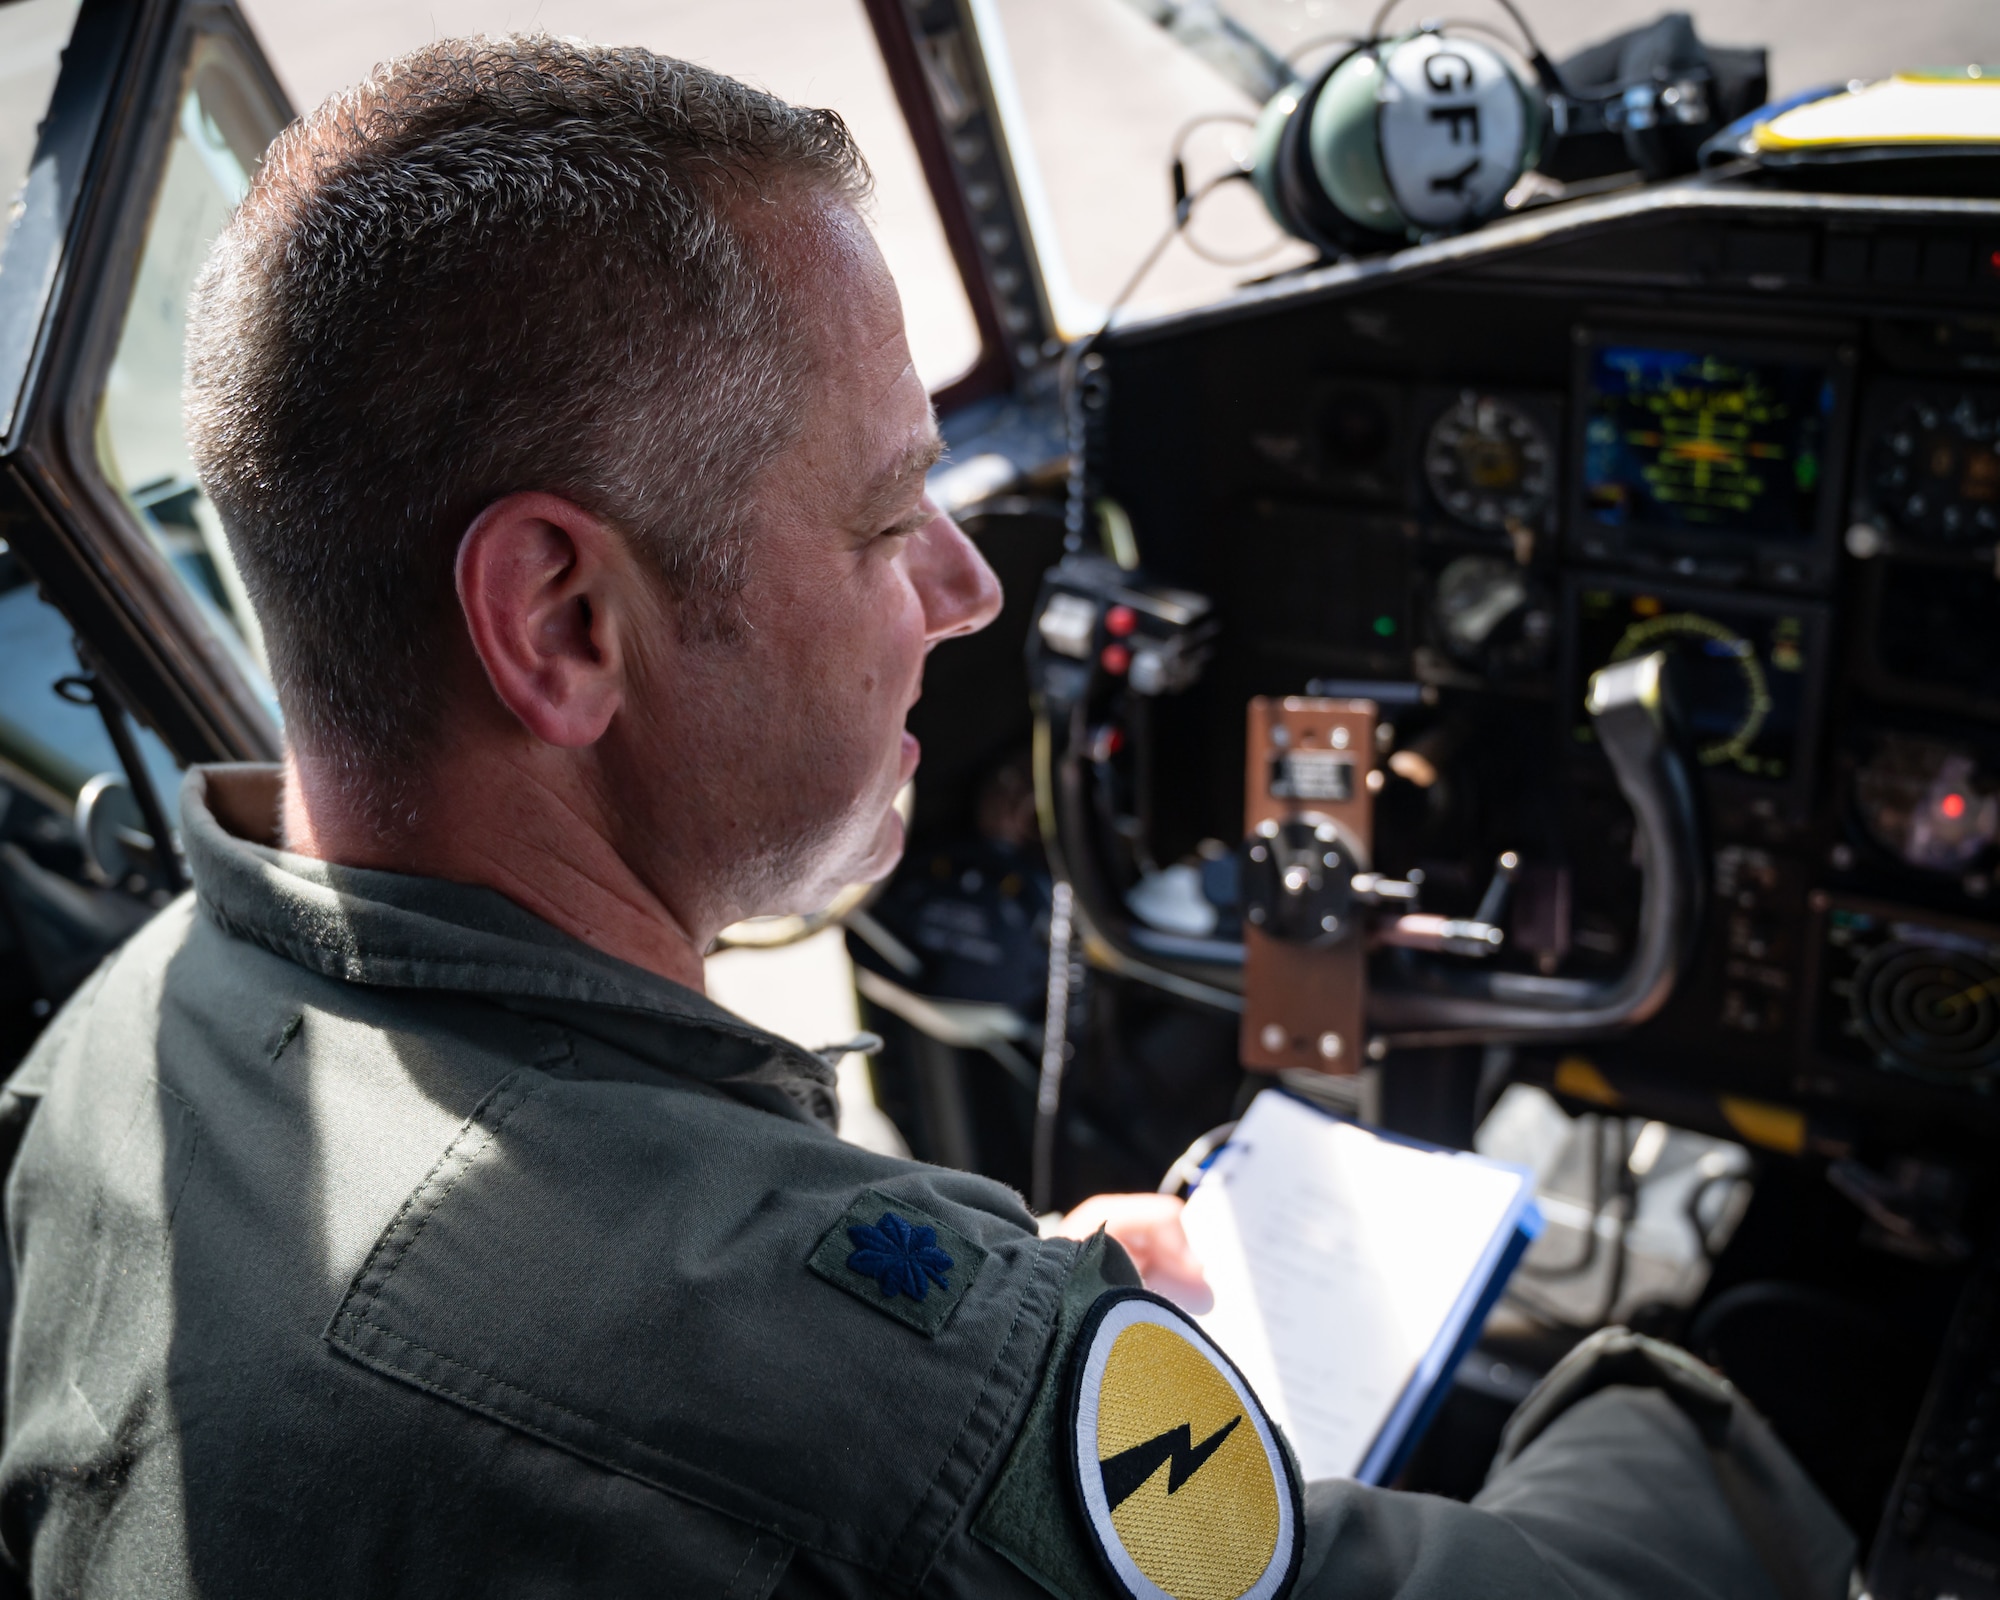 Air Force Lt. Col. Richard Paul Mastalerz II, a pilot assigned to the 103rd Airlift Wing, Connecticut Air National Guard, prepares to fly a C-130H aircraft, June 4, 2022 at Bradley Air National Guard Base, East Granby, Conn. The flight was Mastalerz’ first since being diagnosed with stage 3 colorectal cancer in 2020. (U.S. Air Force photo by Master Sgt. Tamara R. Dabney)